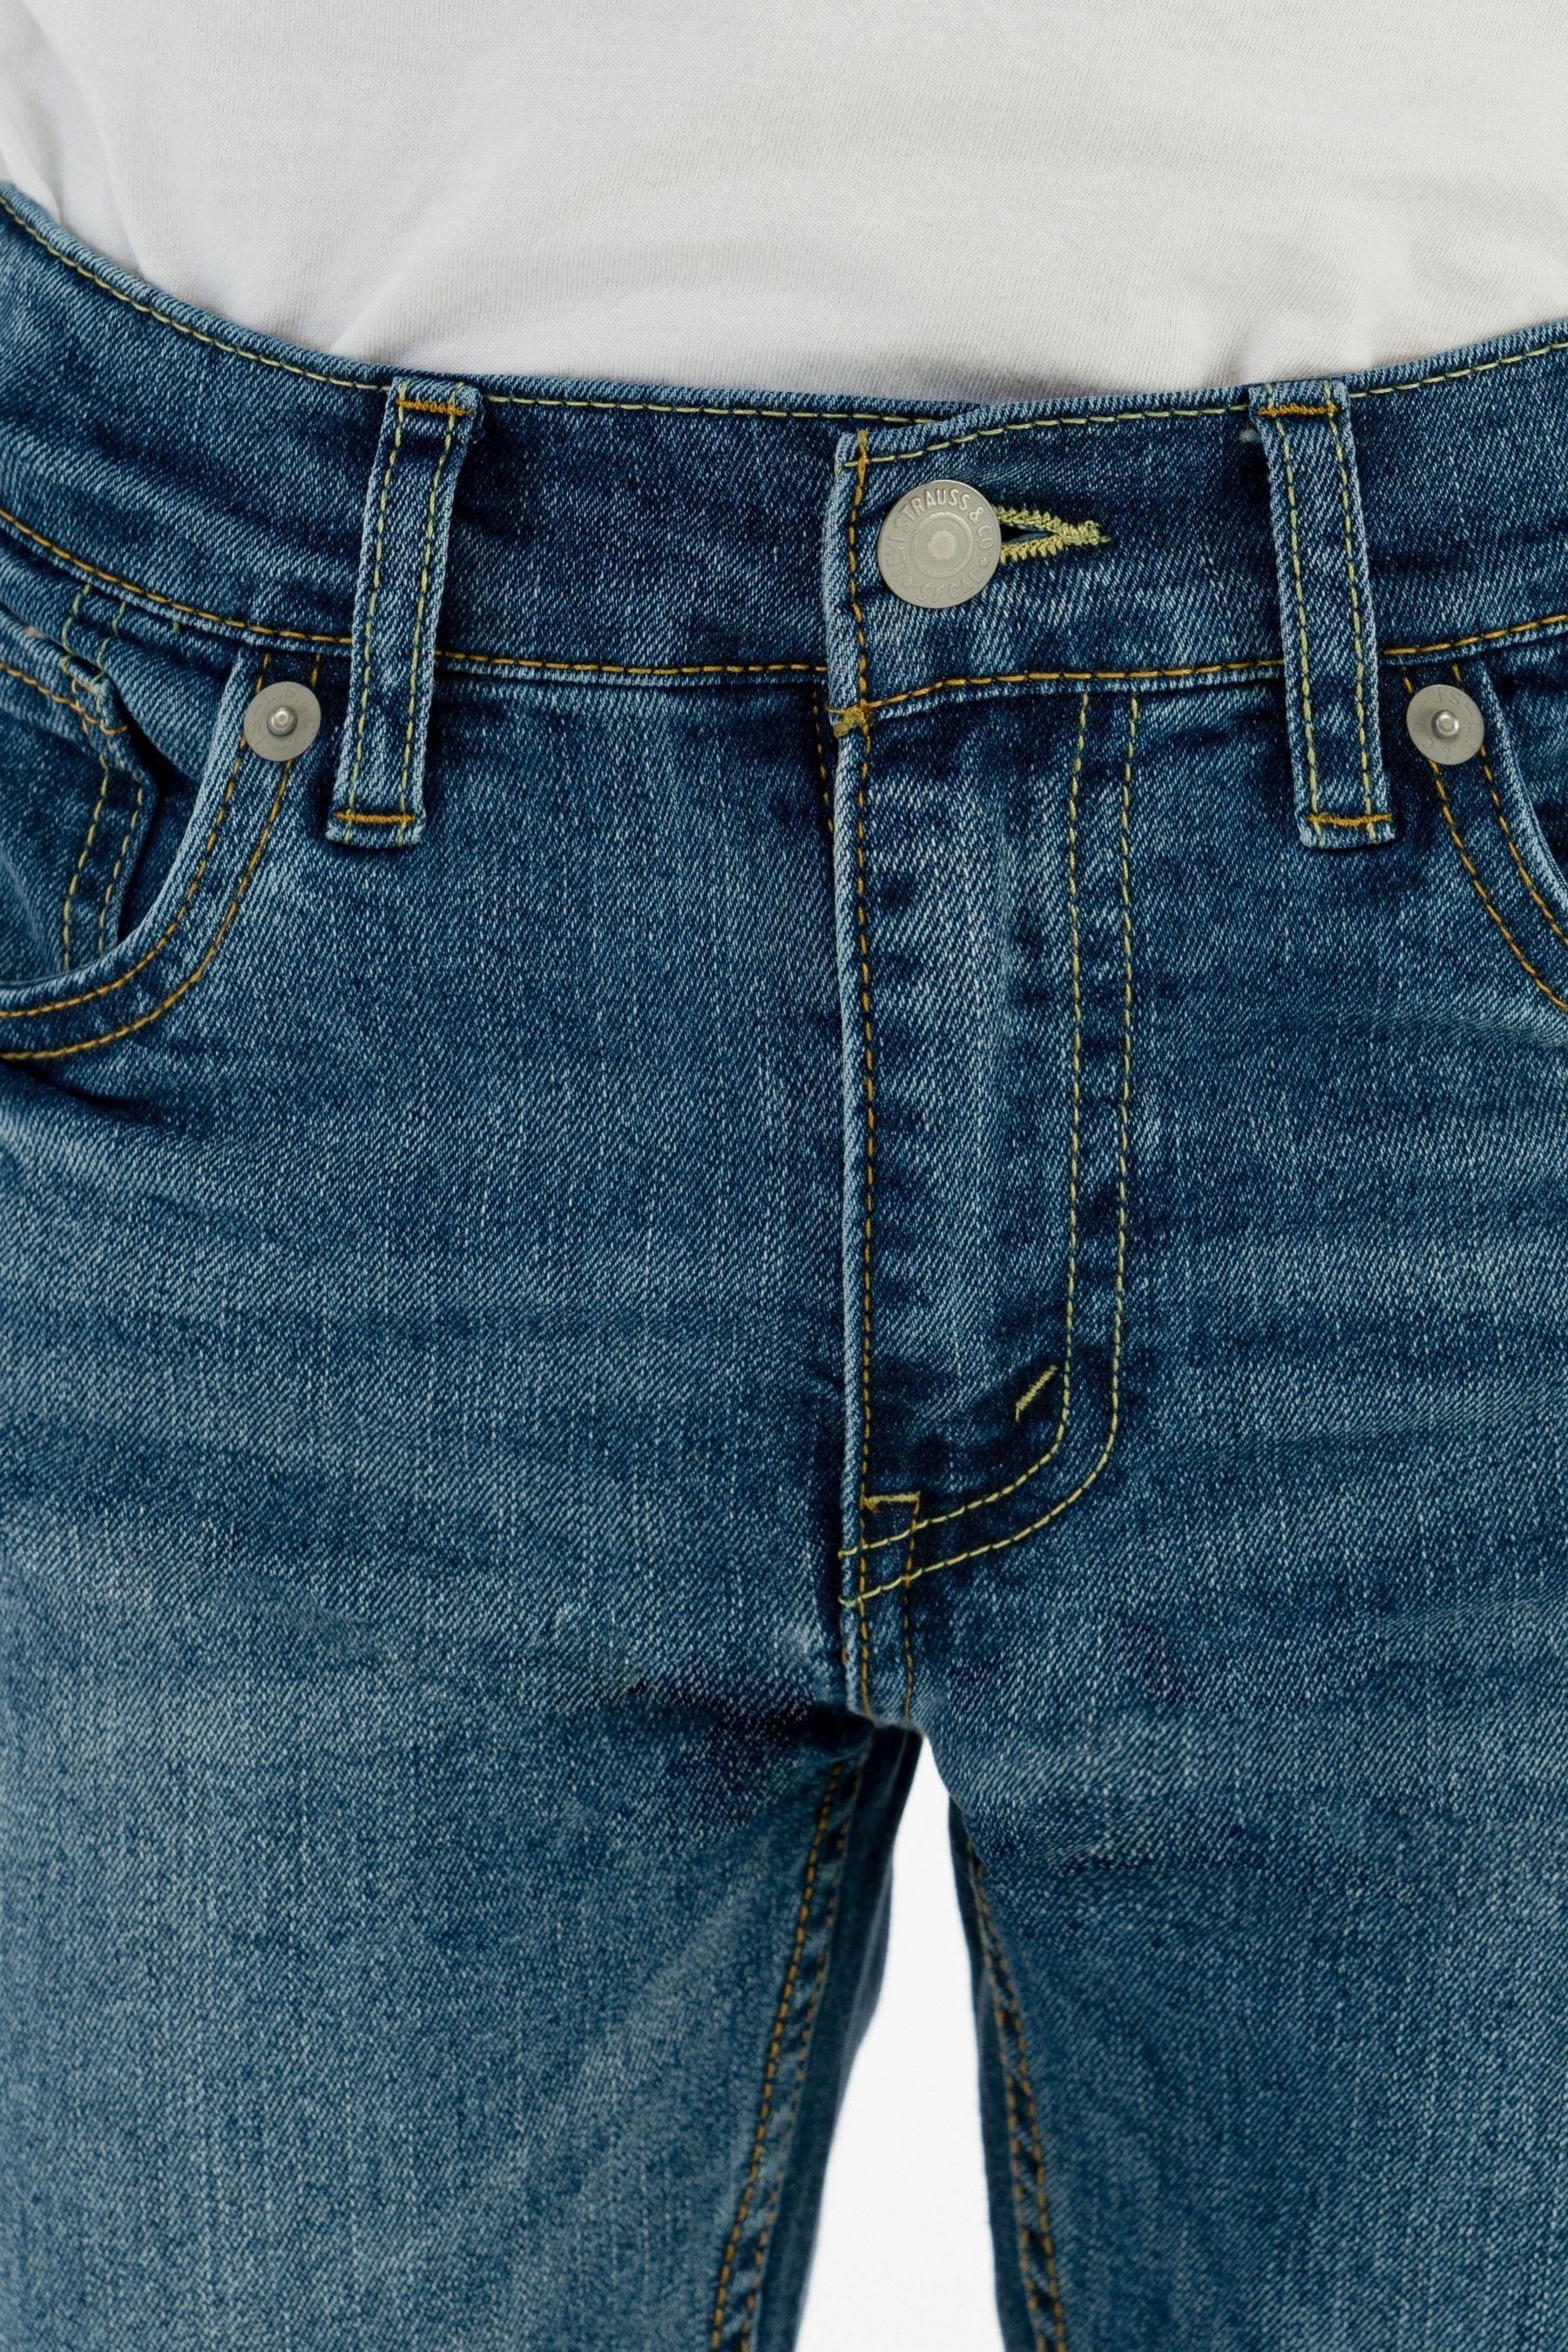 Buy Levi's® Burbank Kids 510™ Skinny Fit Jeans from the Next UK online shop